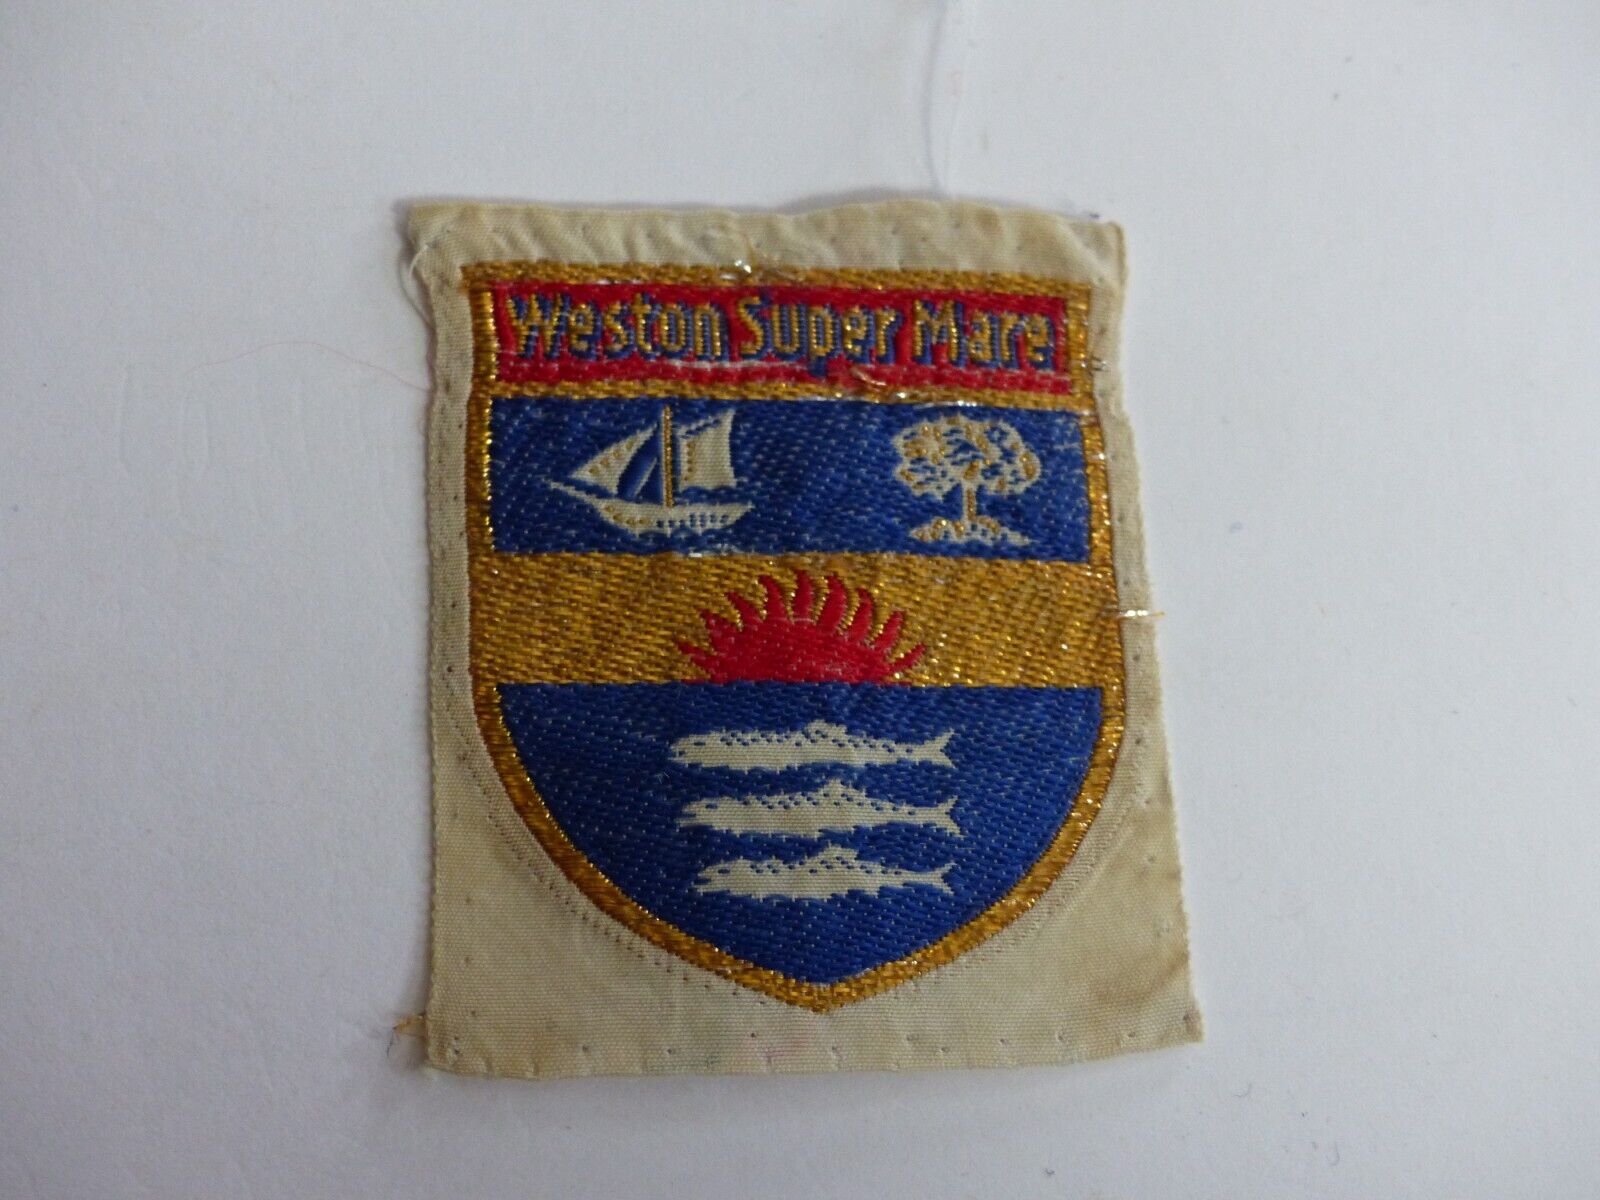 Used Vintage Weston Super Mare England Scout Patch Badge Ship Tree 3 Fish Crest